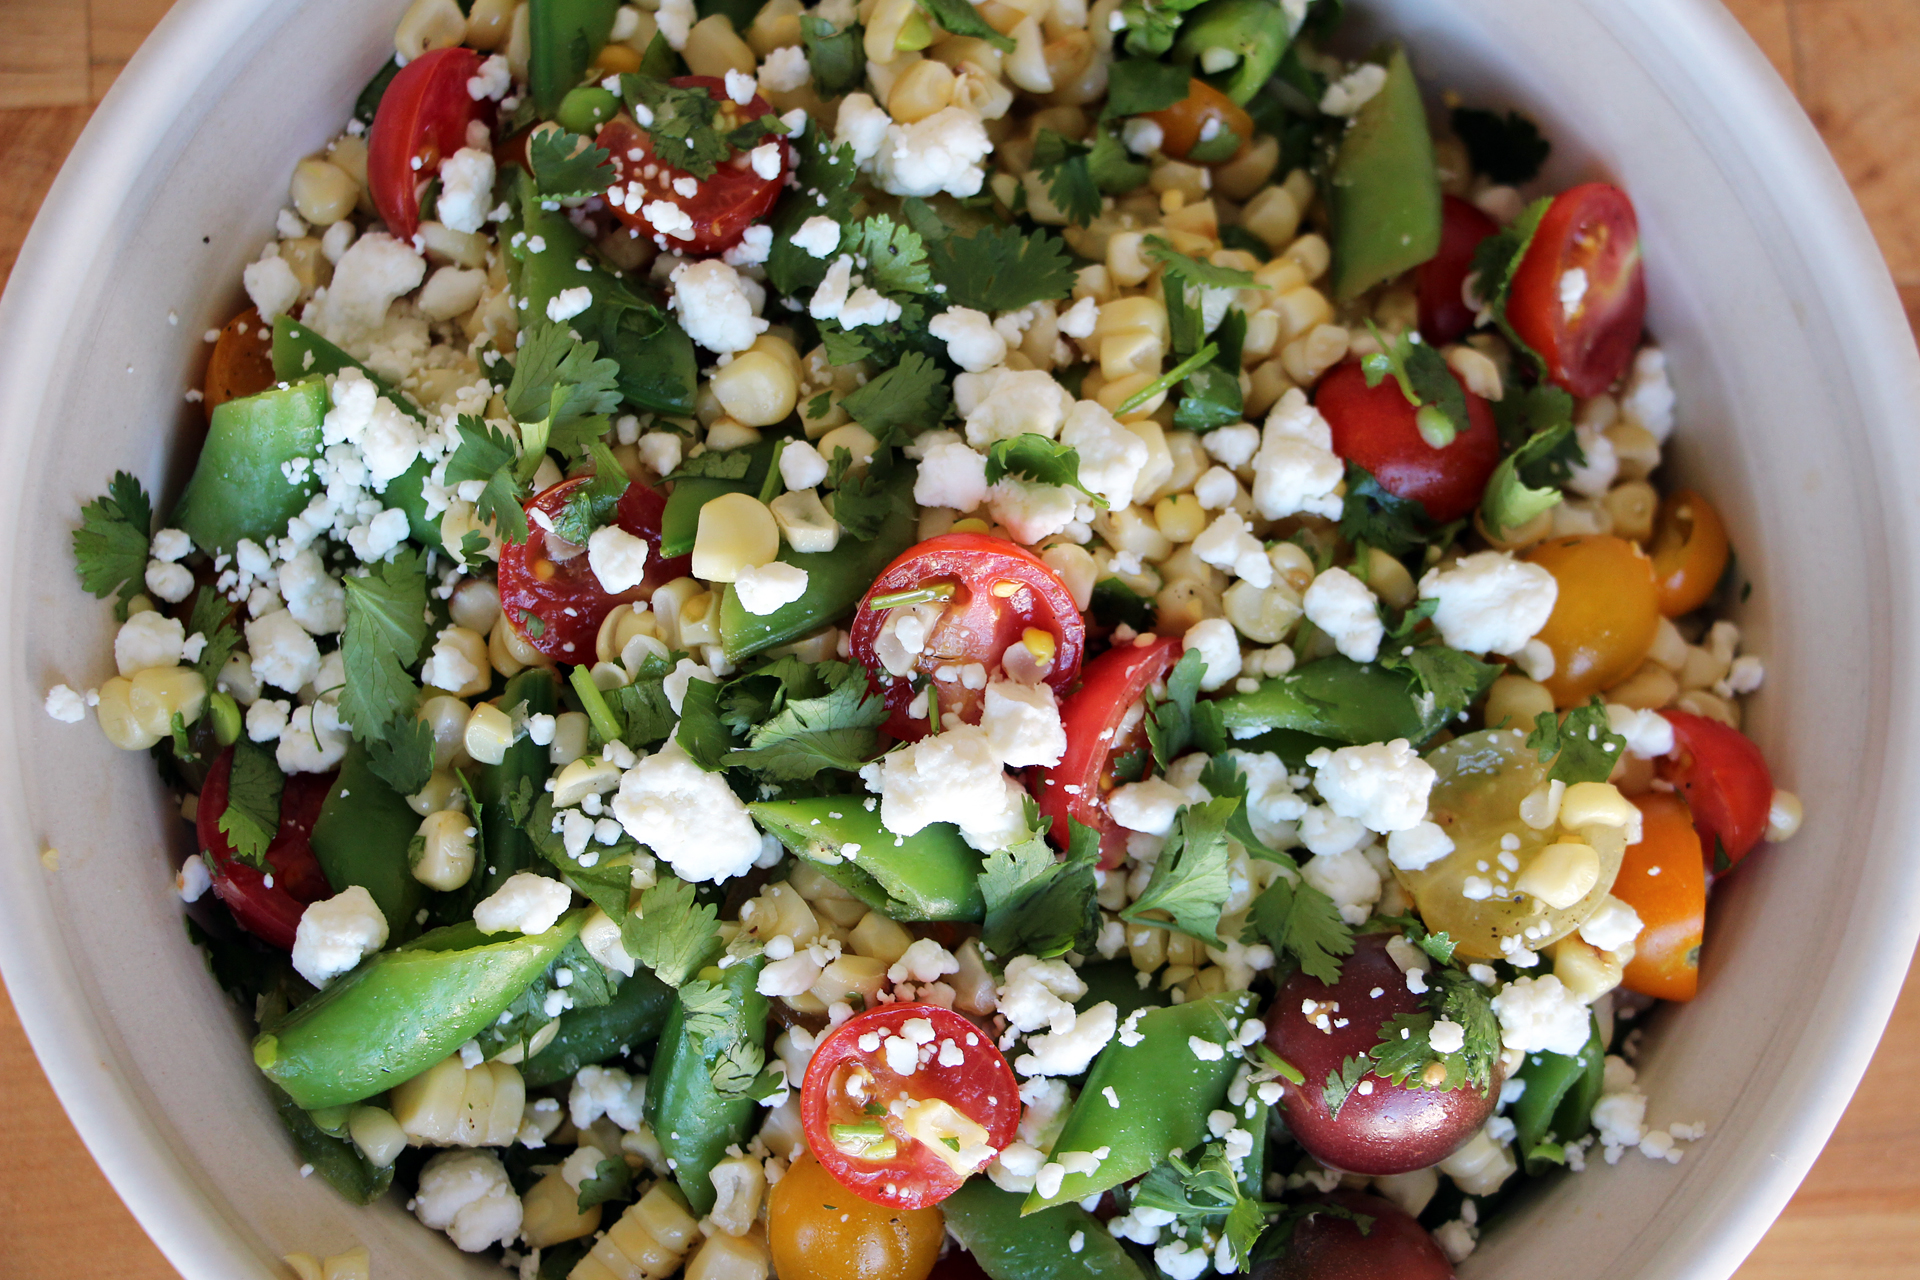 Grilled Corn Salad with Sugar Snaps, Cherry Tomatoes, and Goat Cheese